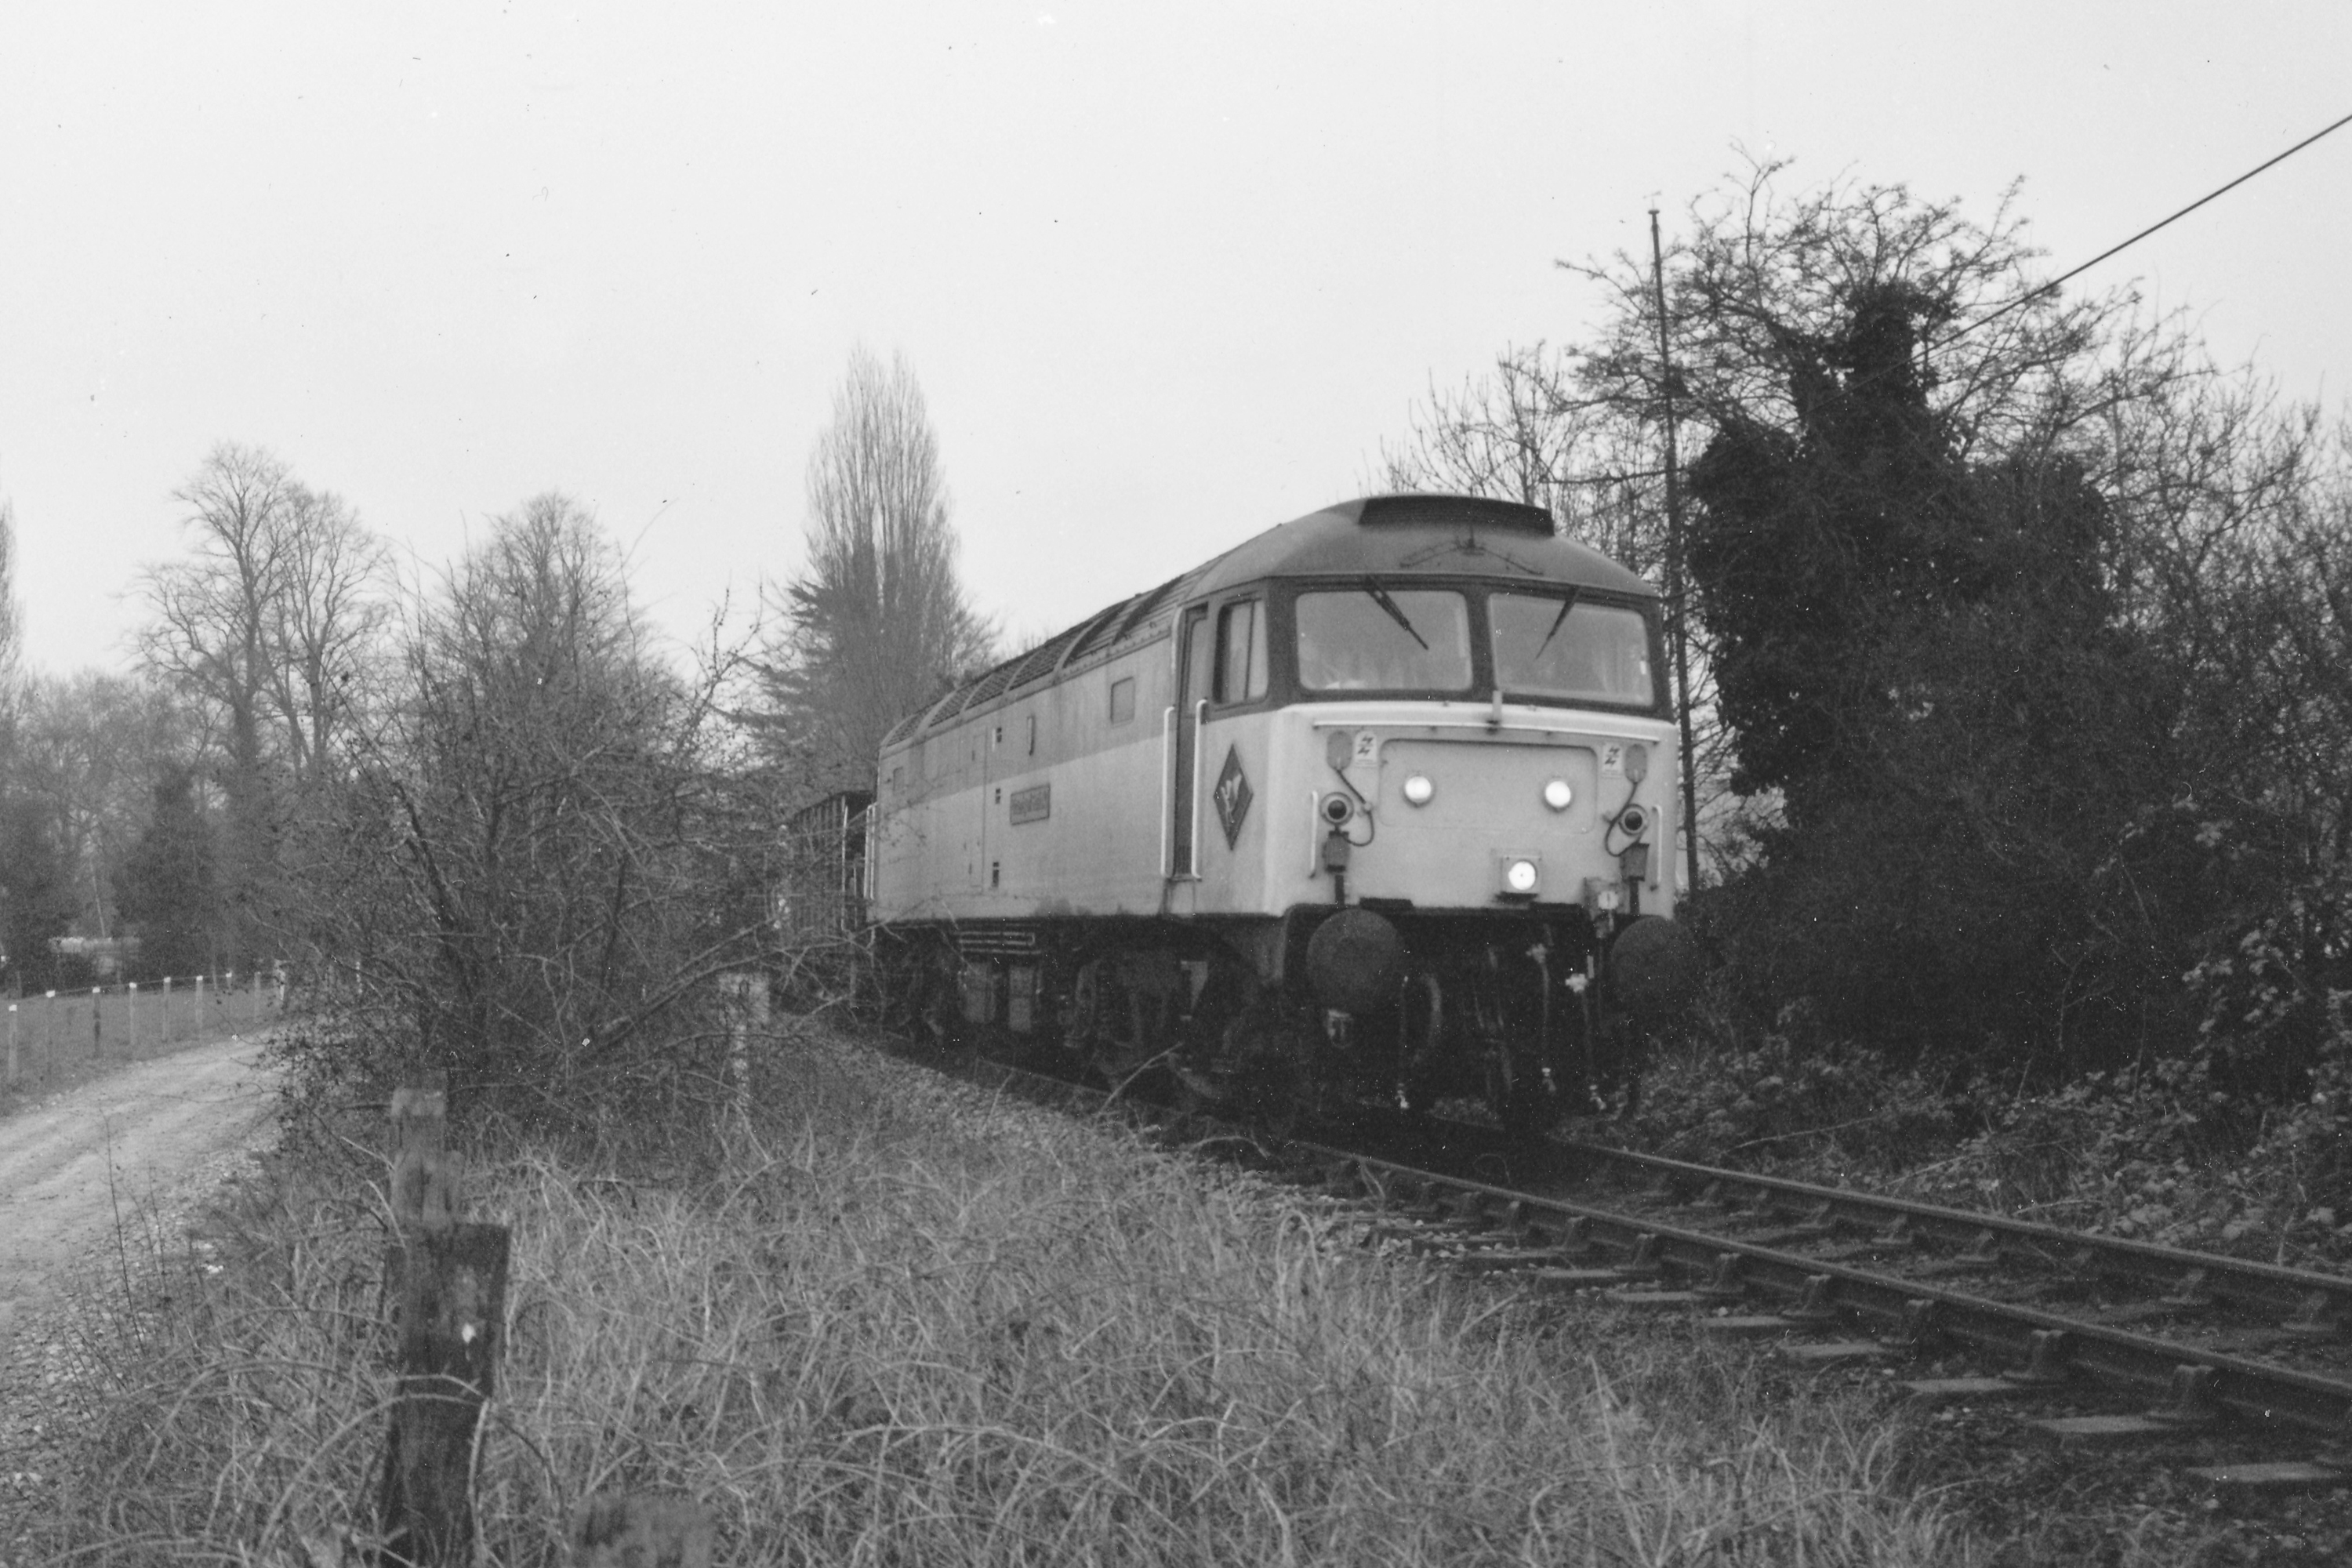 47702 'County of Suffolk' 